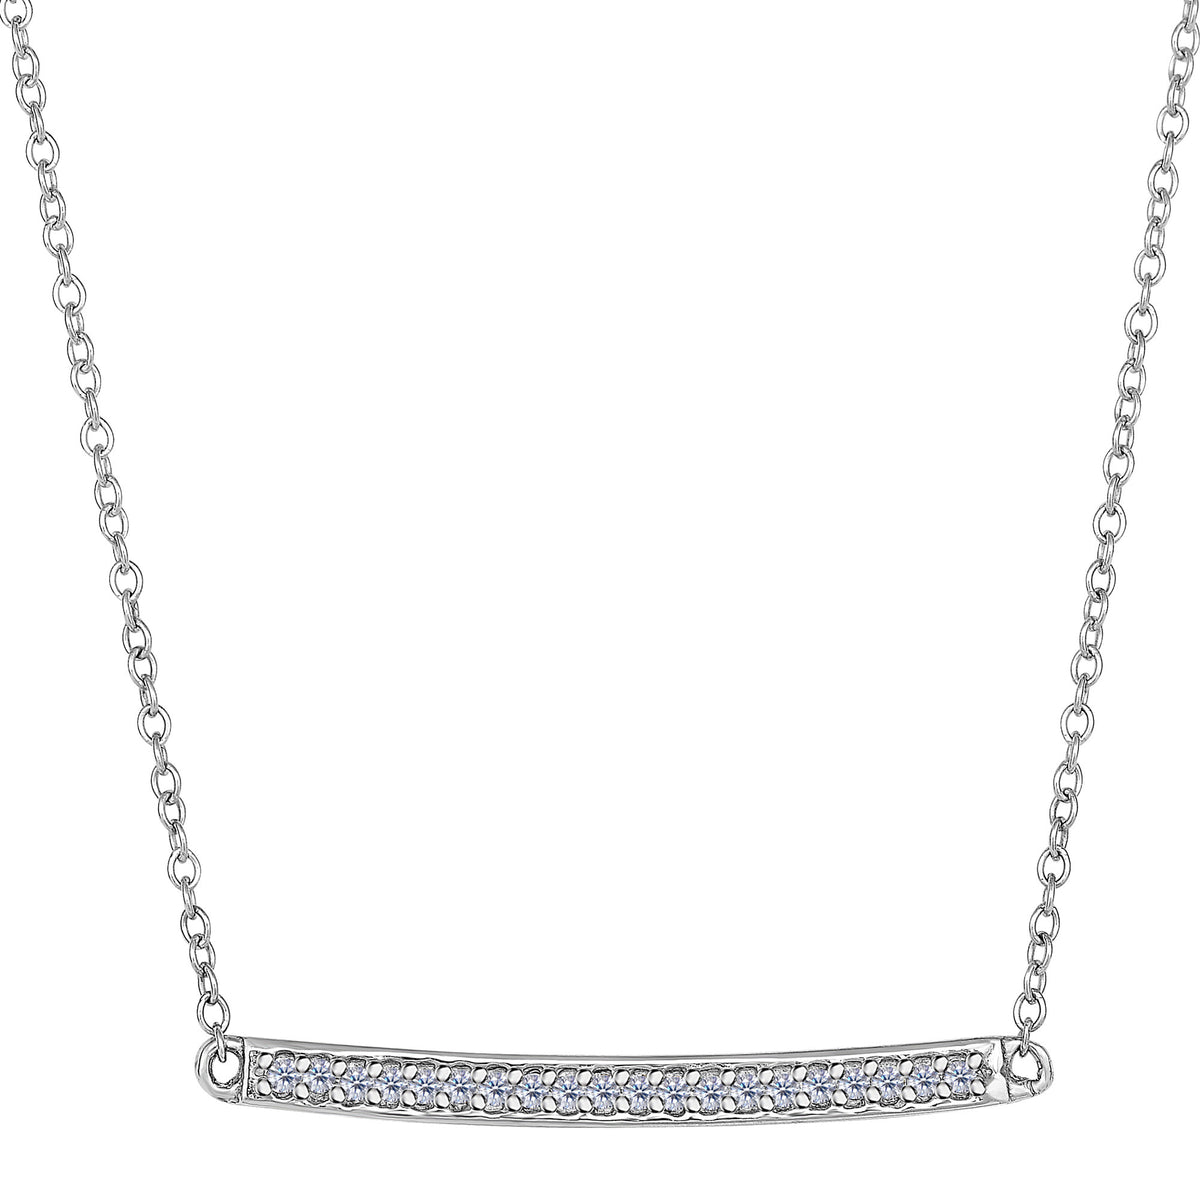 14k White Gold 0.12Ct Diamond Bar Necklace - 18 Inch fine designer jewelry for men and women